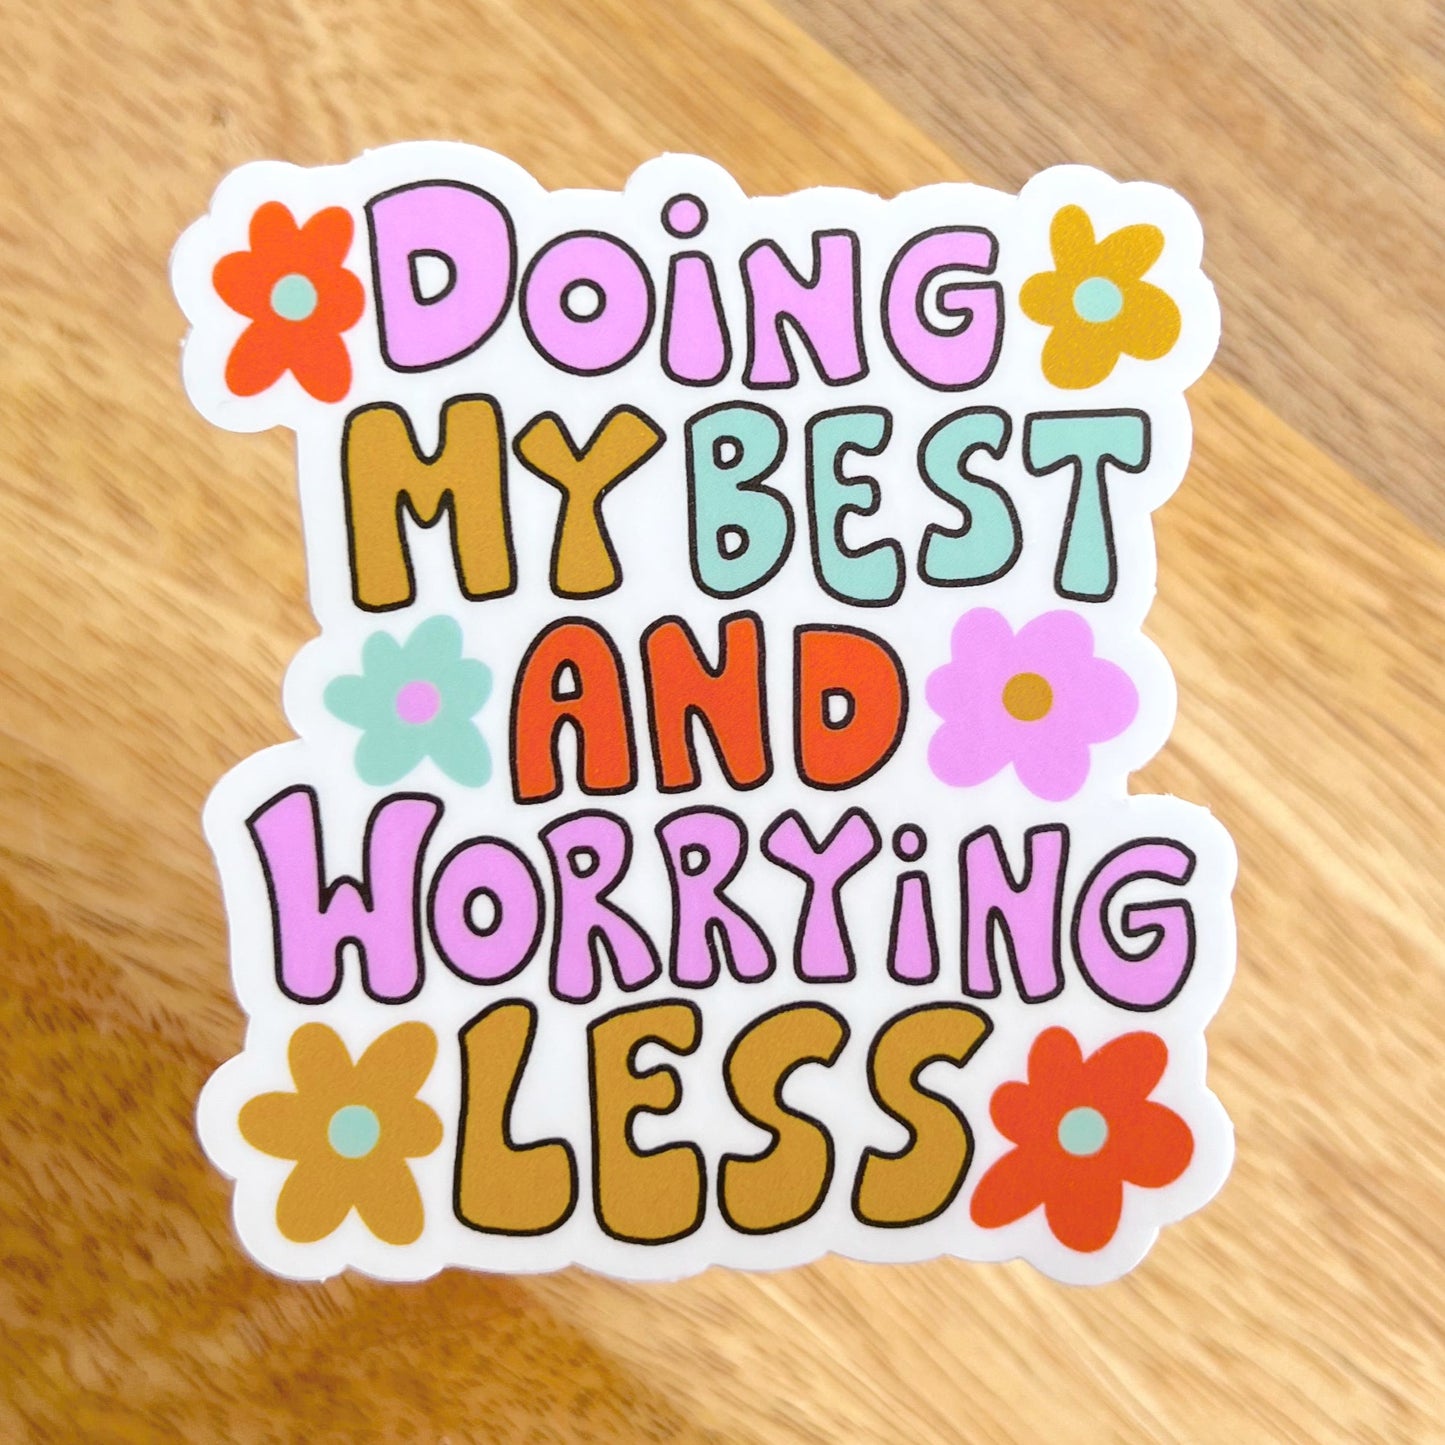 Doing my best & Worrying less Sticker